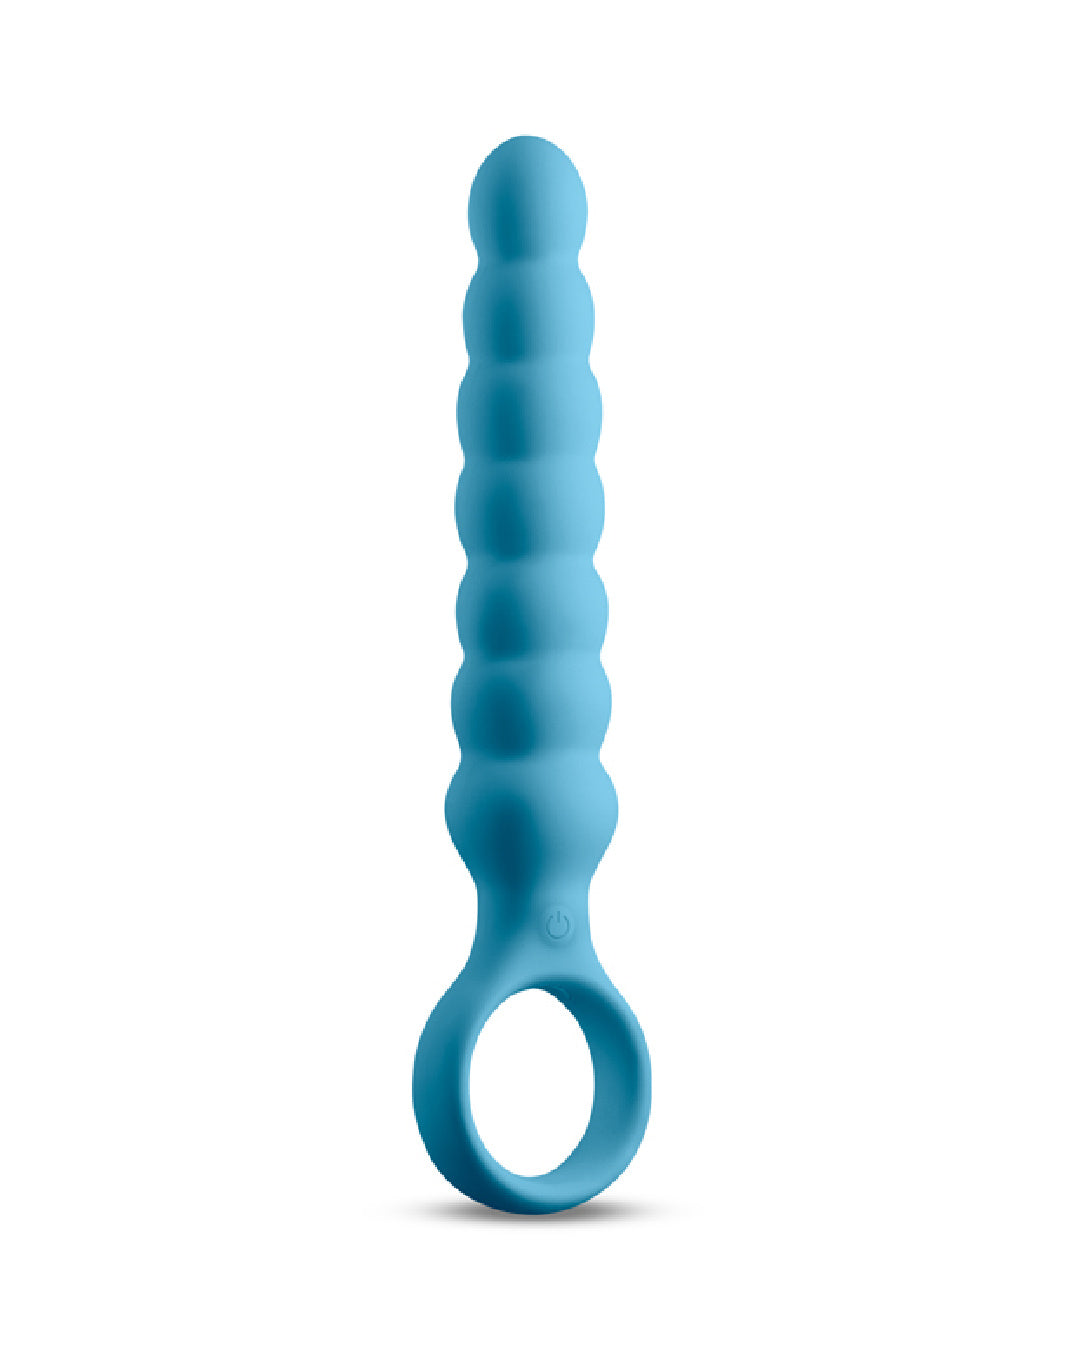 Lucent Vibrating Anal Probe with Finger Loop upright on white background 